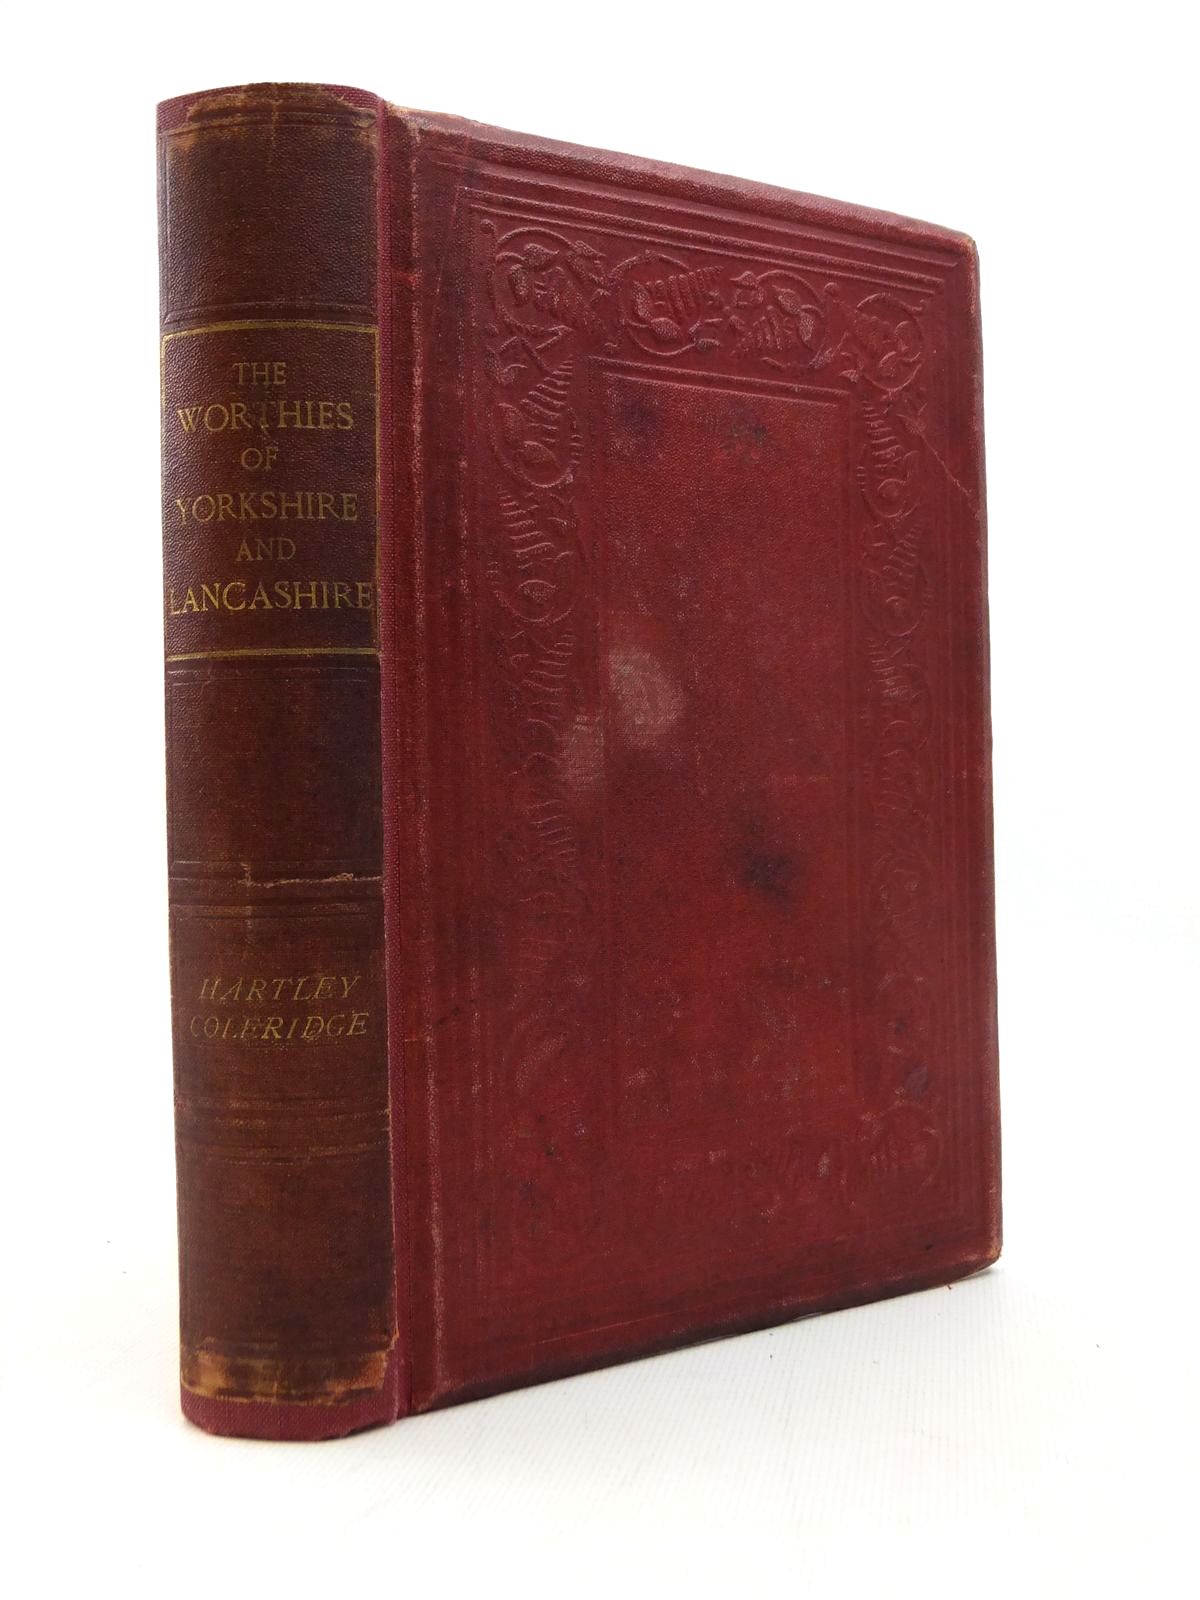 Photo of THE WORTHIES OF YORKSHIRE AND LANCASHIRE written by Coleridge, Hartley published by Frederick Warne & Co. (STOCK CODE: 1208783)  for sale by Stella & Rose's Books